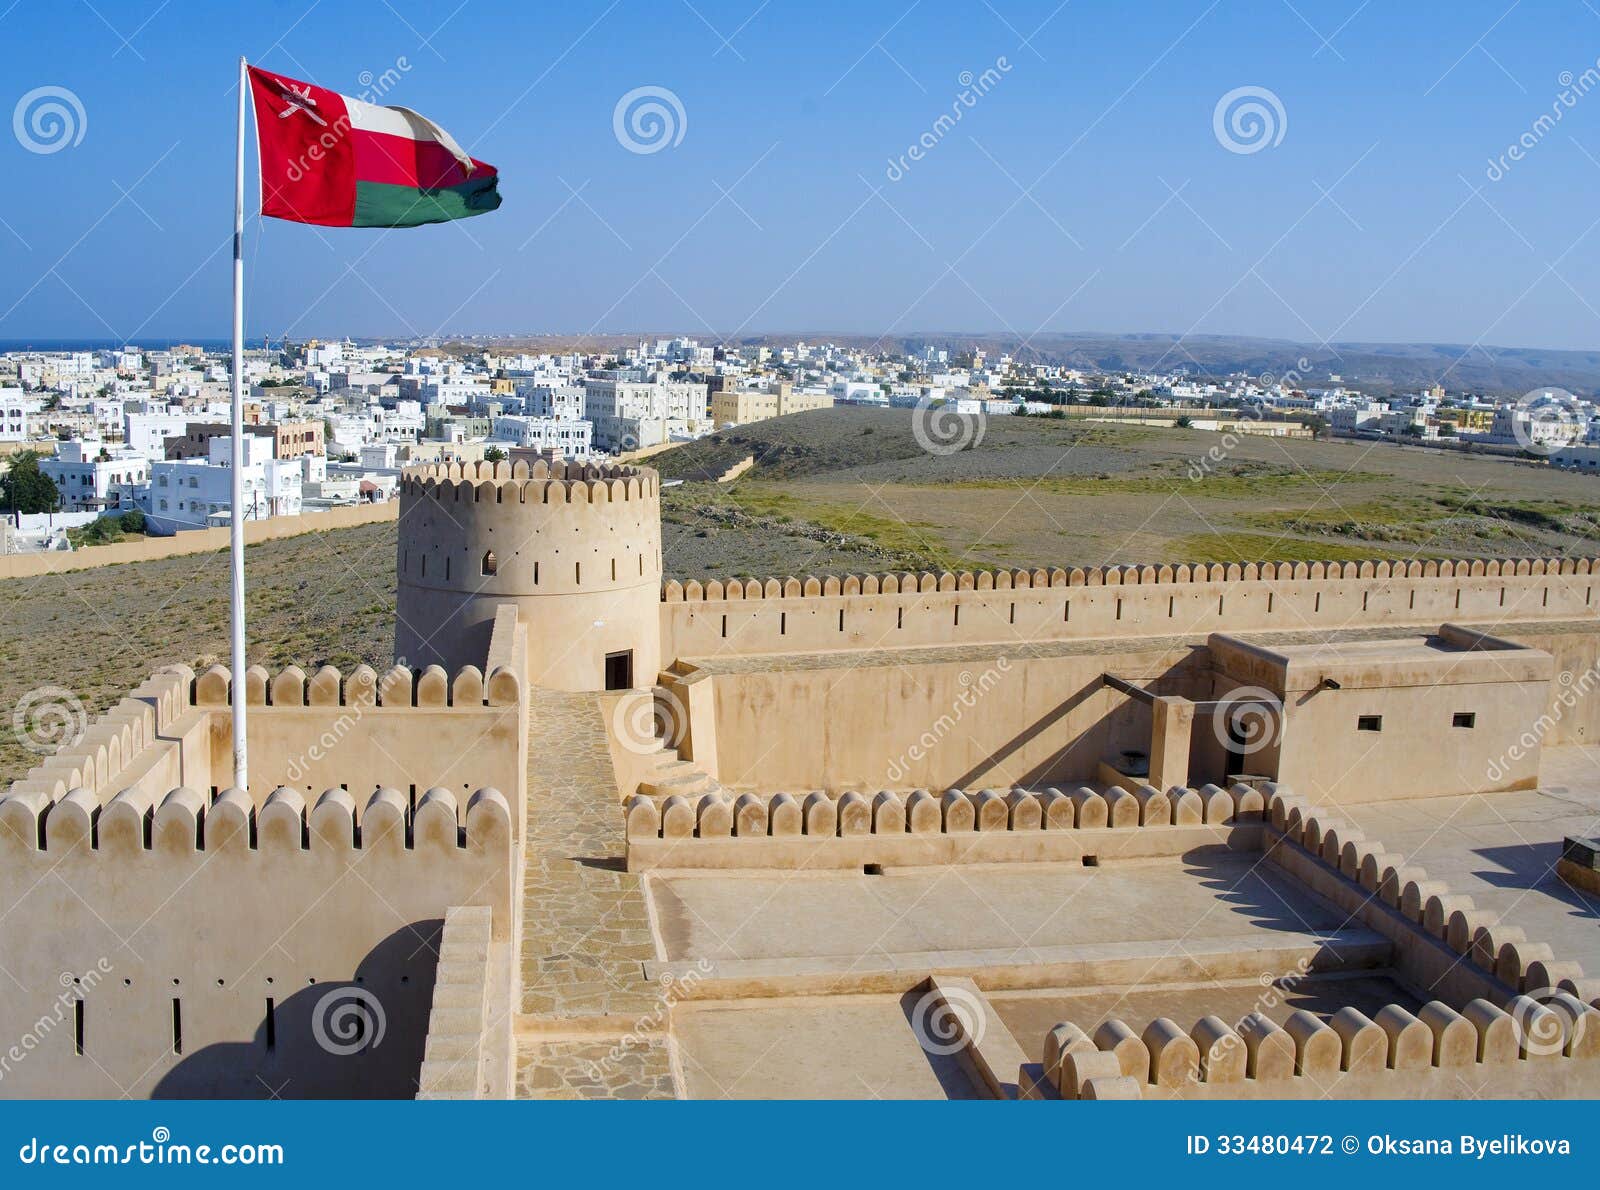 historic fortification, sunaysilah castle or fort in sur, sul